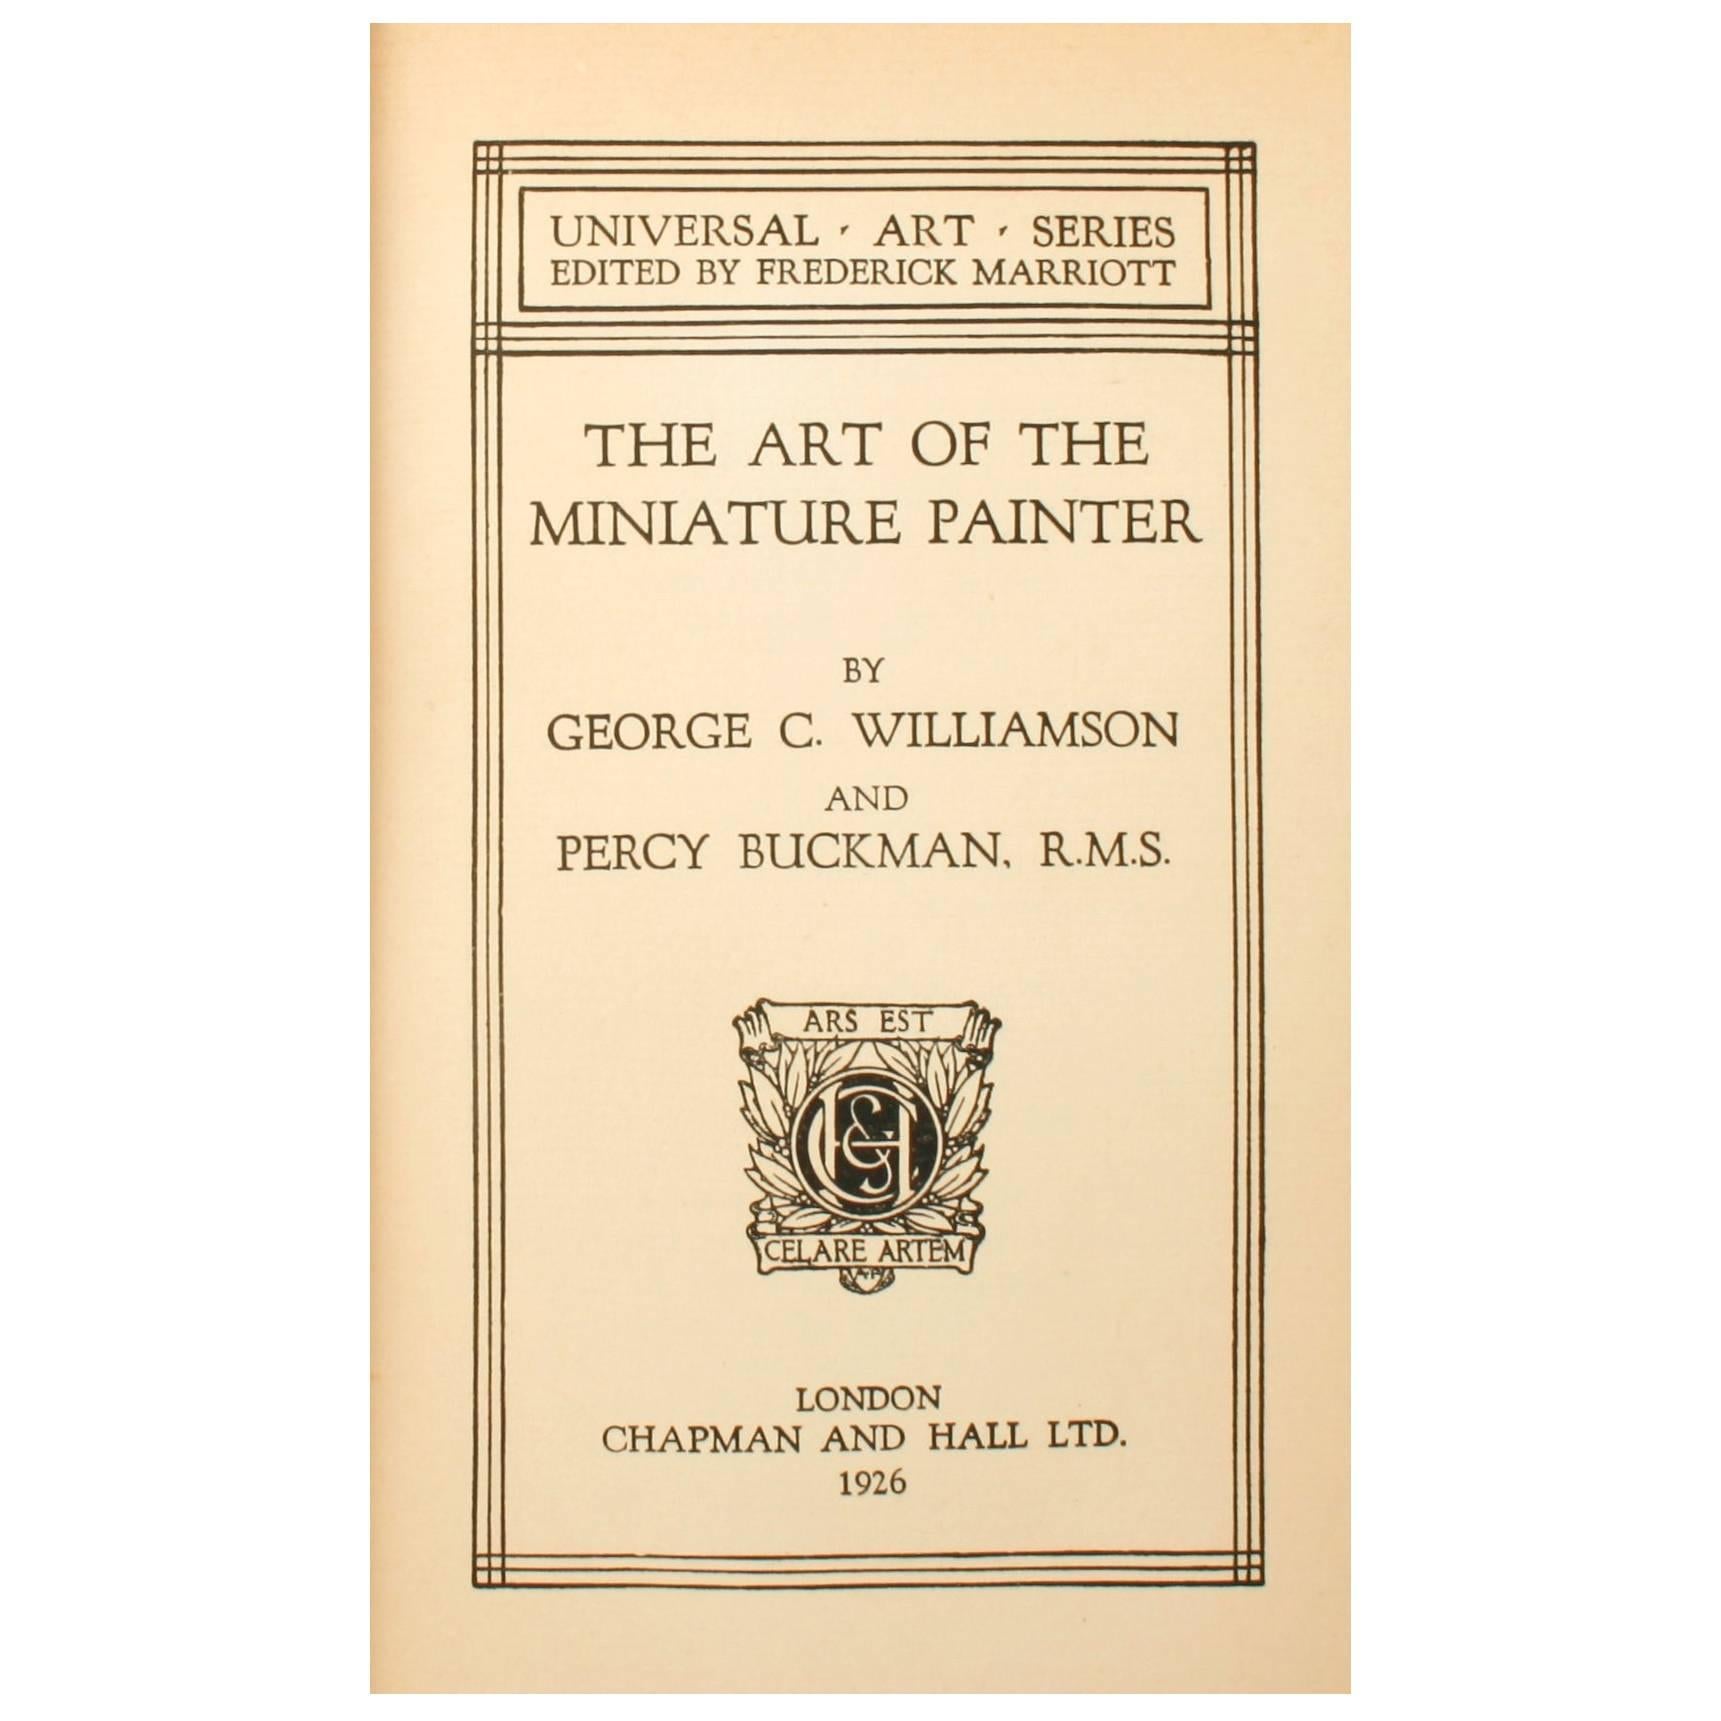 The Art of The Miniature Painter by Dr. George C. Williamson and Percy Buckman. London: Chapman and Hall Ltd, 1926. 1st edition hardcover with dust jacket. 264 pp. A book on the art of miniature painting illustrating it's origins, artists,